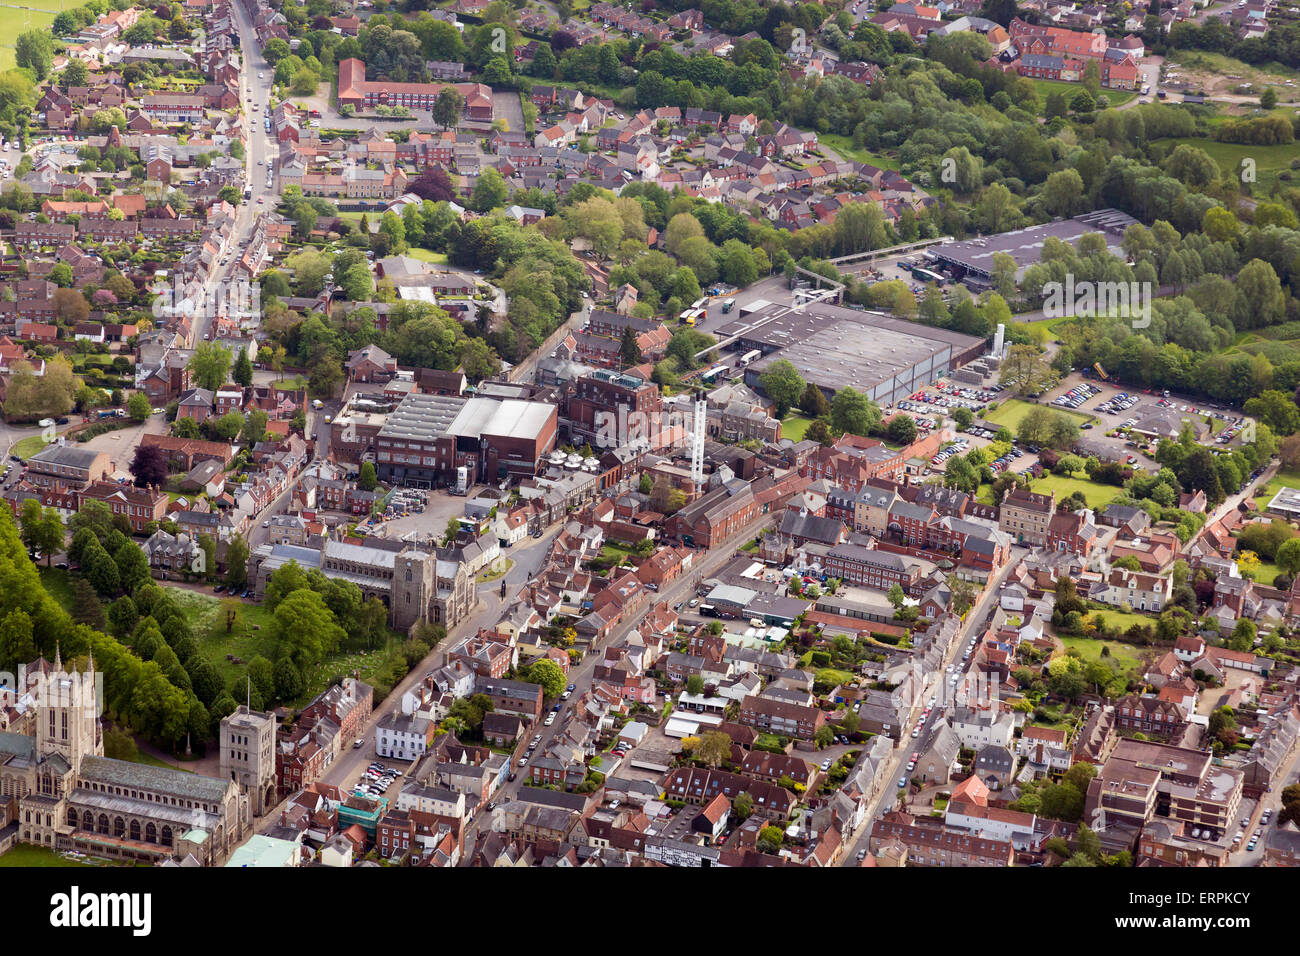 aerial photo view of Bury St Edmunds town centre showing the brewery buildings Stock Photo